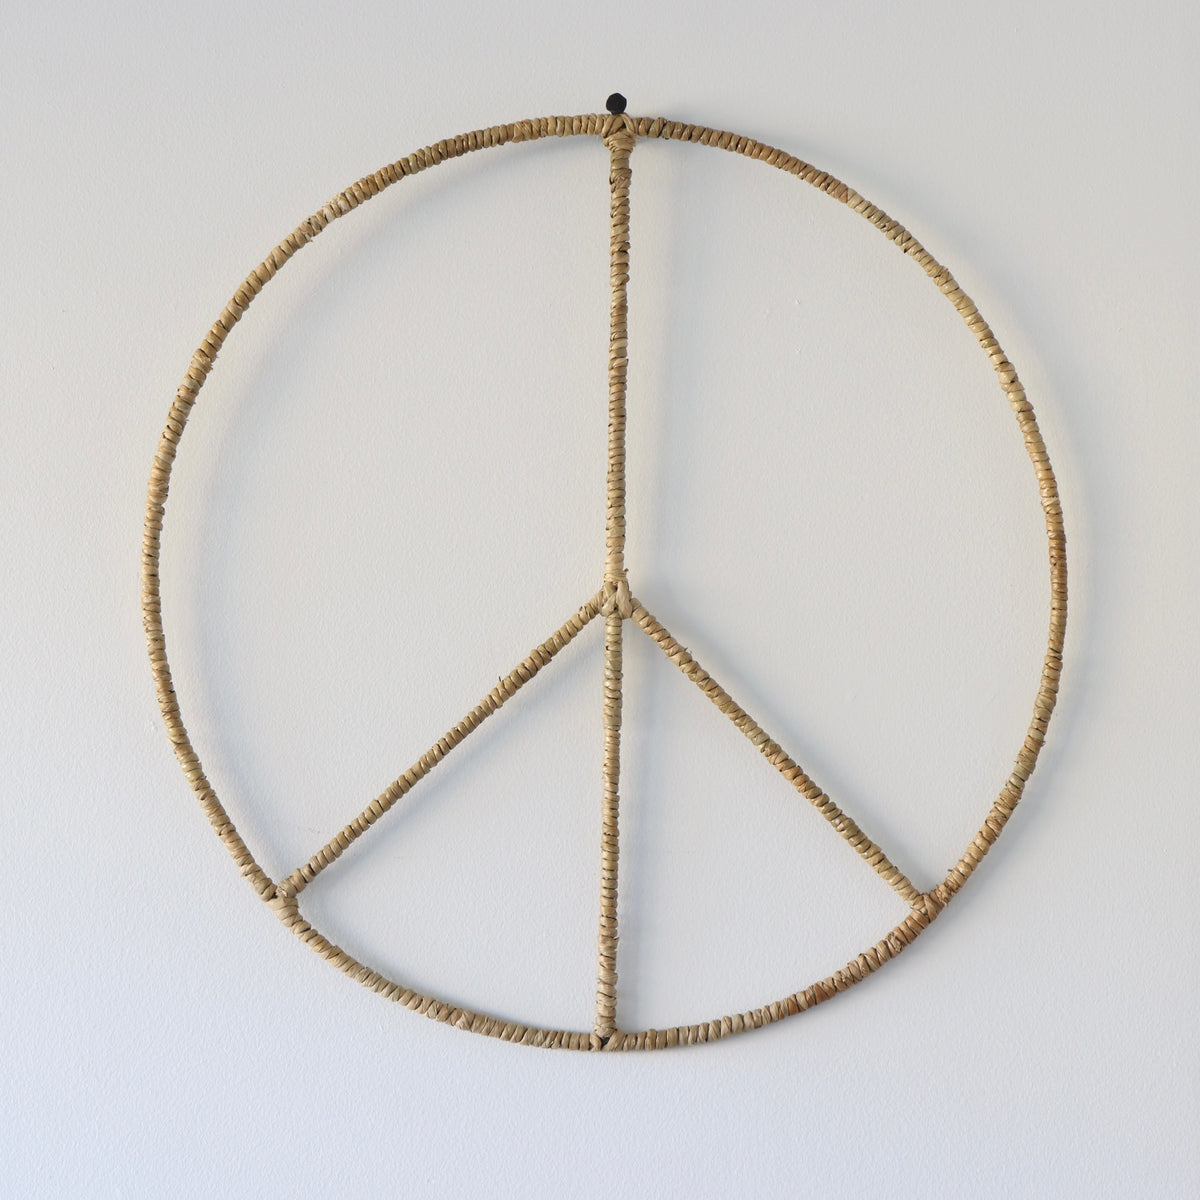 Groovy Peace Sign Seagrass and Iron Wall Hanging - Holistic Habitat 